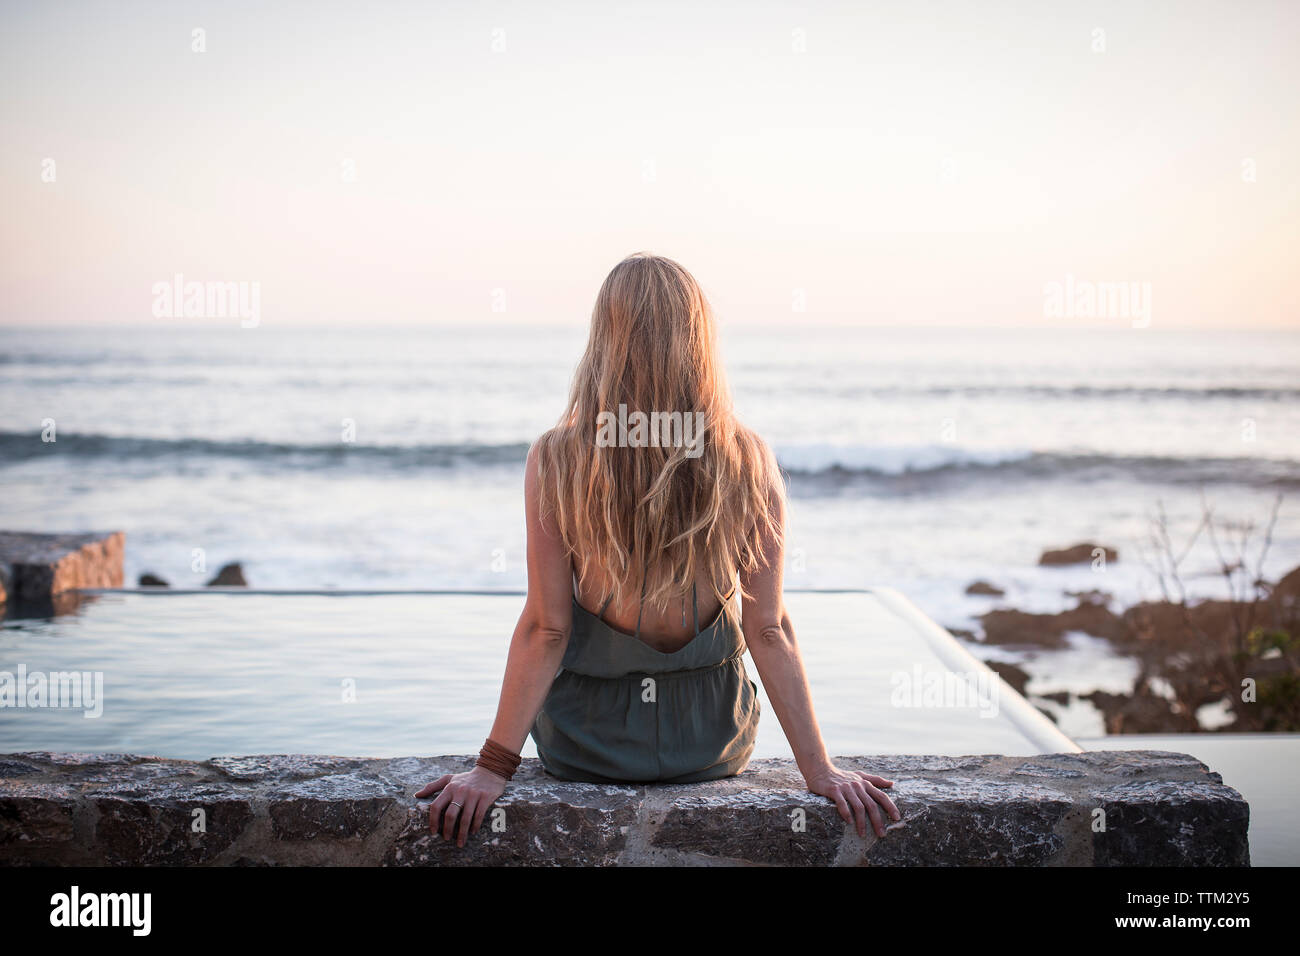 Rear view of woman sitting on retaining wall at artificial pond against sea and clear sky Stock Photo